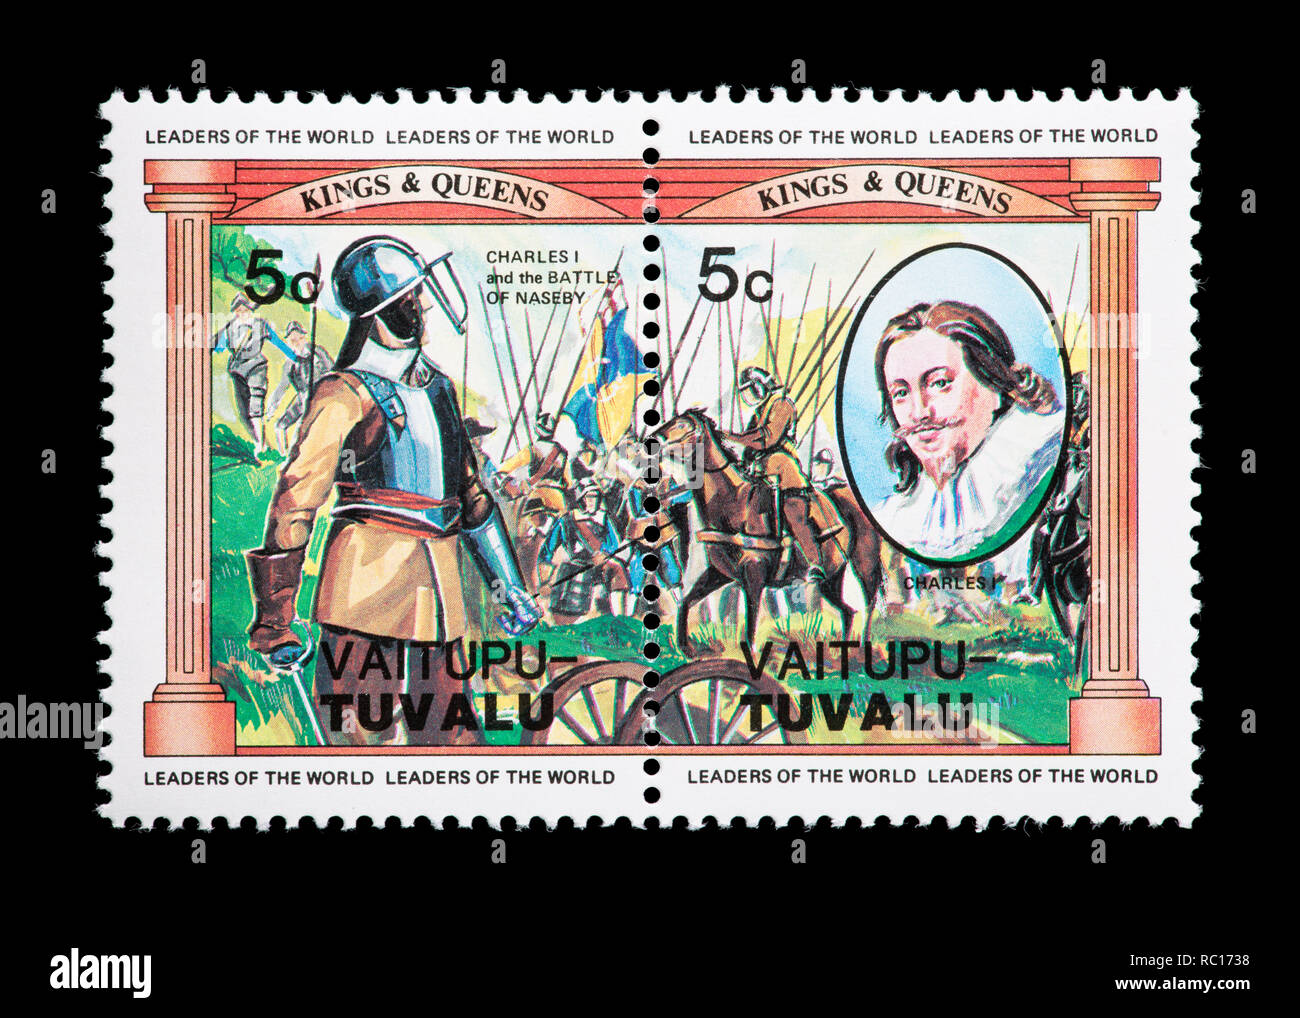 Postage stamp from Vaitupu Tuvalu depicting Charles I and the Battle of Naseby. Stock Photo